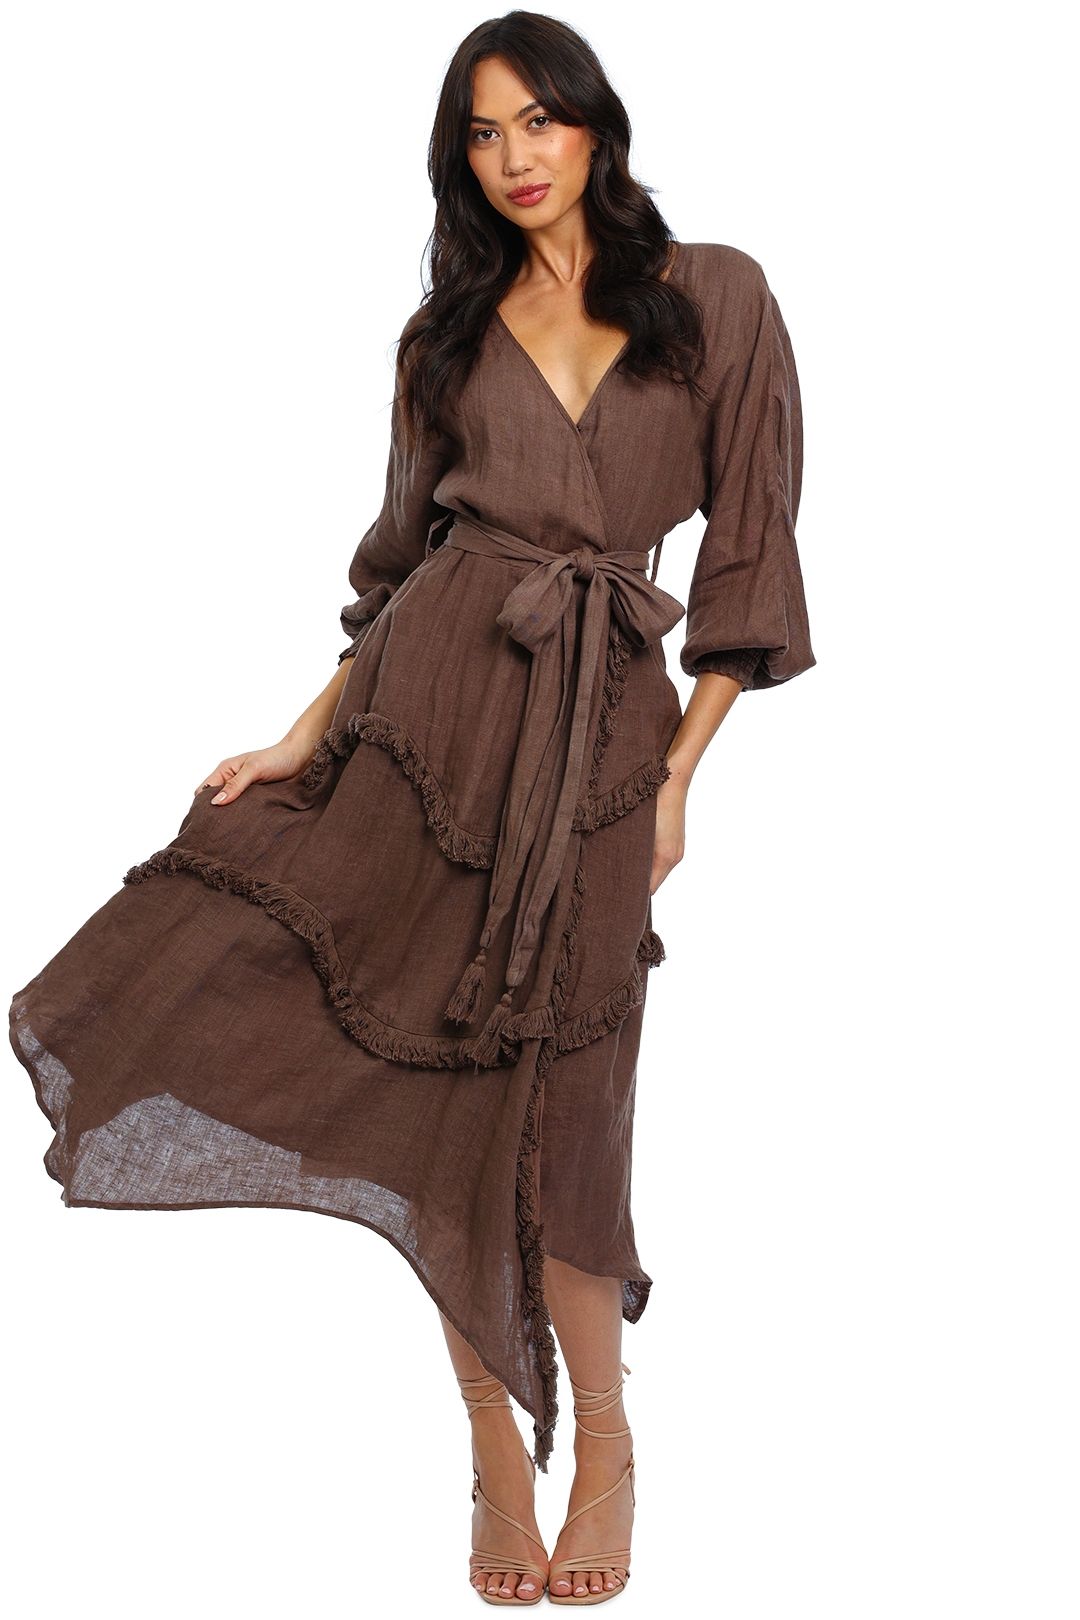 Ministry of Style Wilderness Maxi Dress wrap